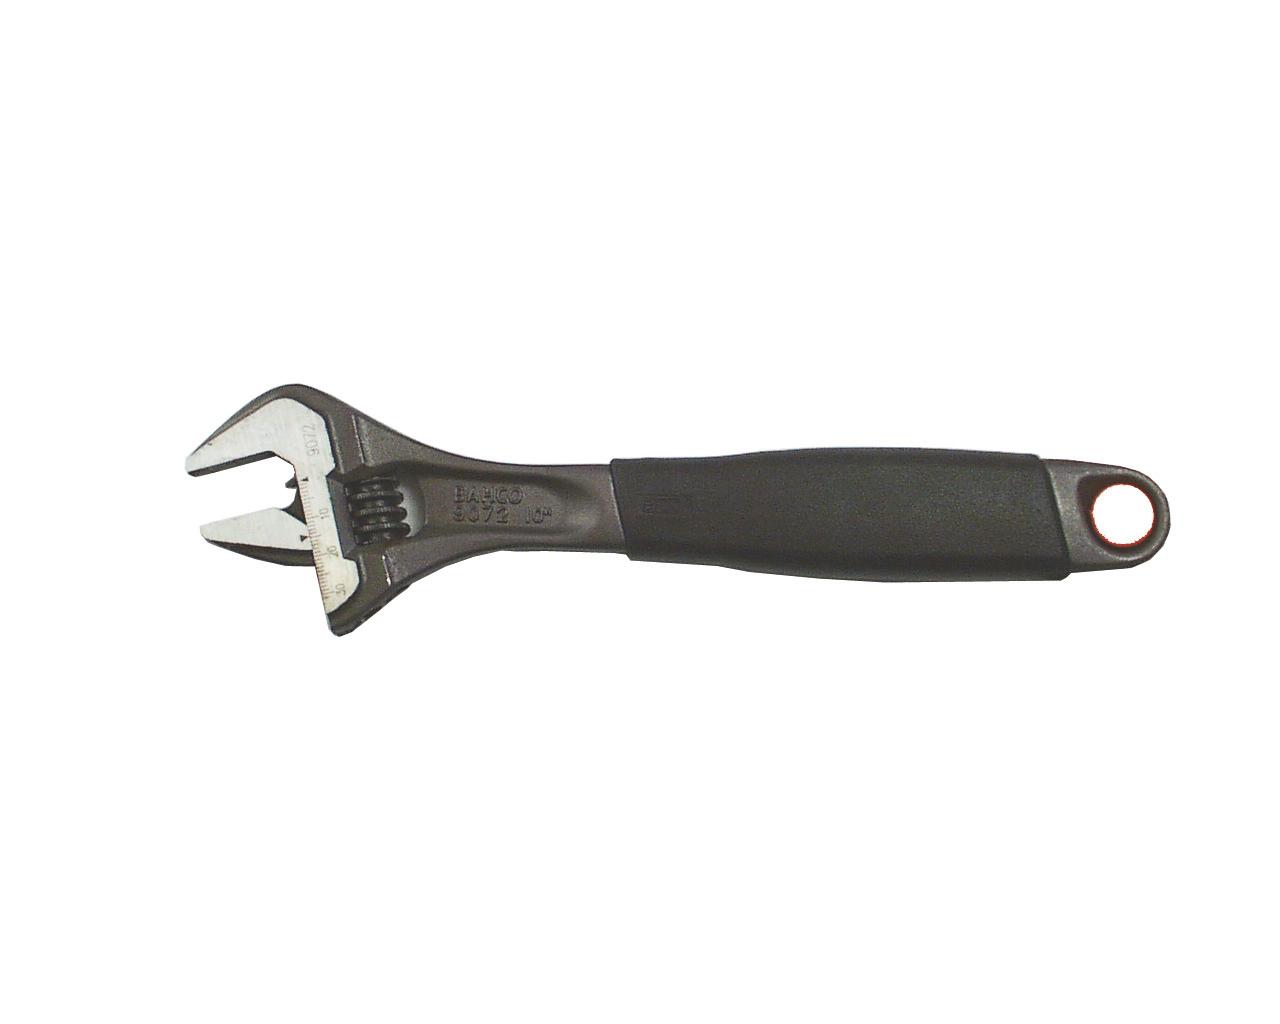 Bahco 90 series adjustable wrench